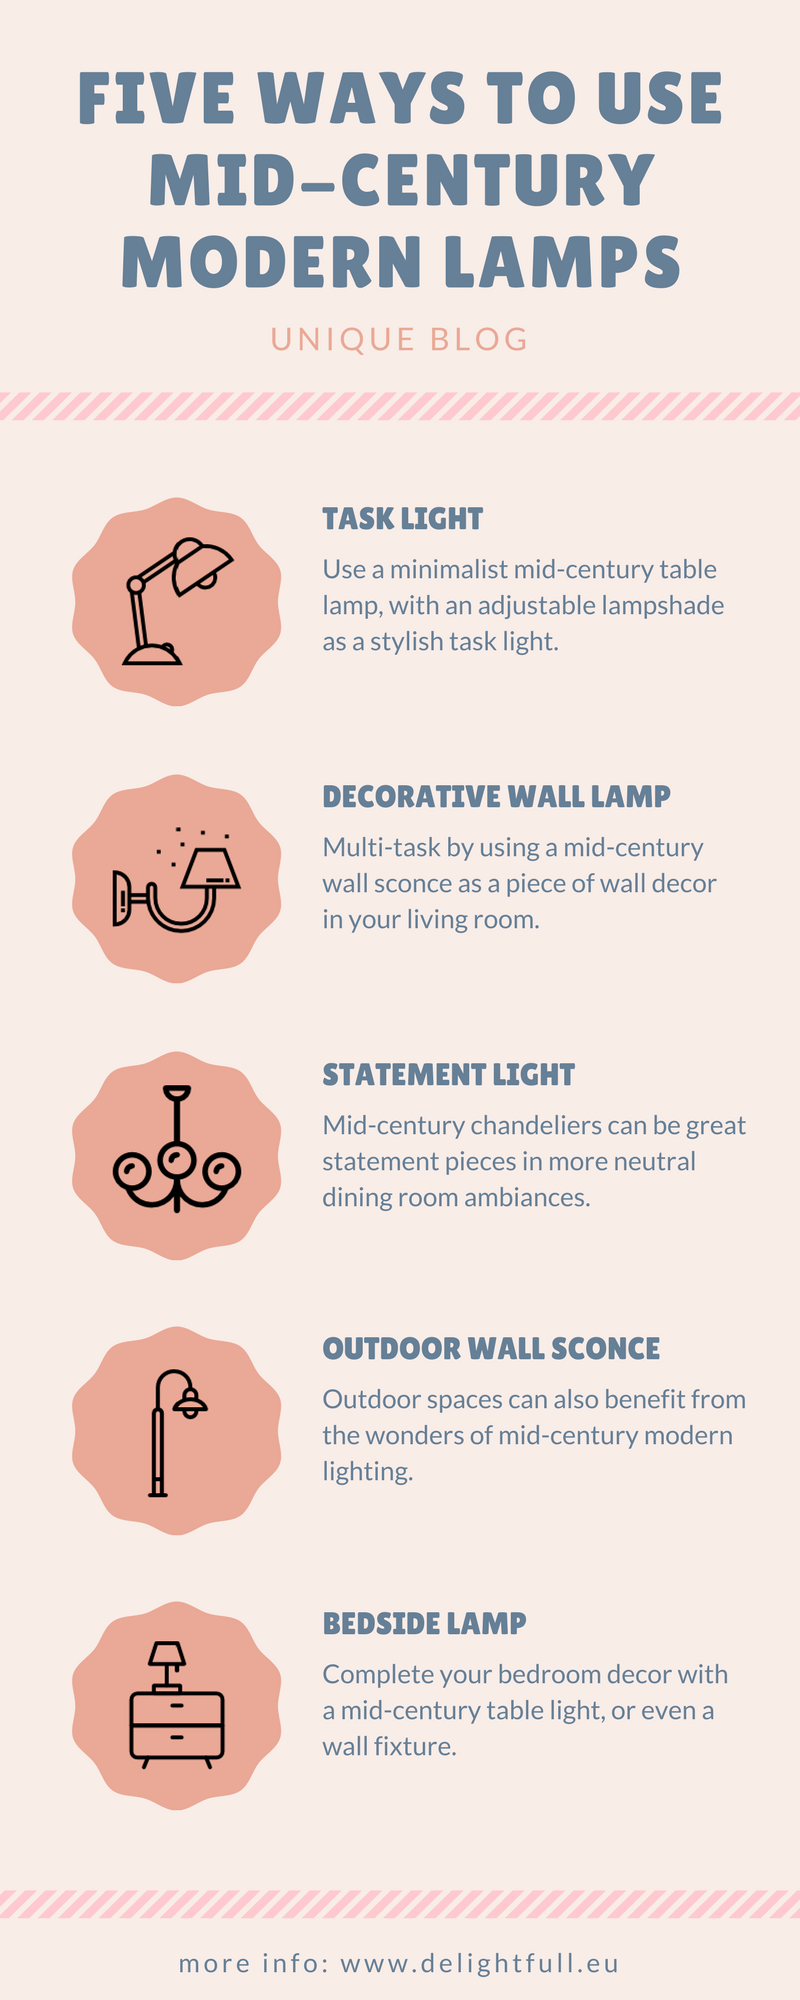 Cleaning Tips To Preserve Your Mid-Century Modern Lights In Bathrooms ➤ To see more news about Luxury Bathrooms in the world visit us at http://luxurybathrooms.eu/ #luxurybathrooms #interiordesign #homedecor @BathroomsLuxury @bocadolobo @delightfulll @brabbu @essentialhomeeu @circudesign @mvalentinabath @luxxu @covethouse_